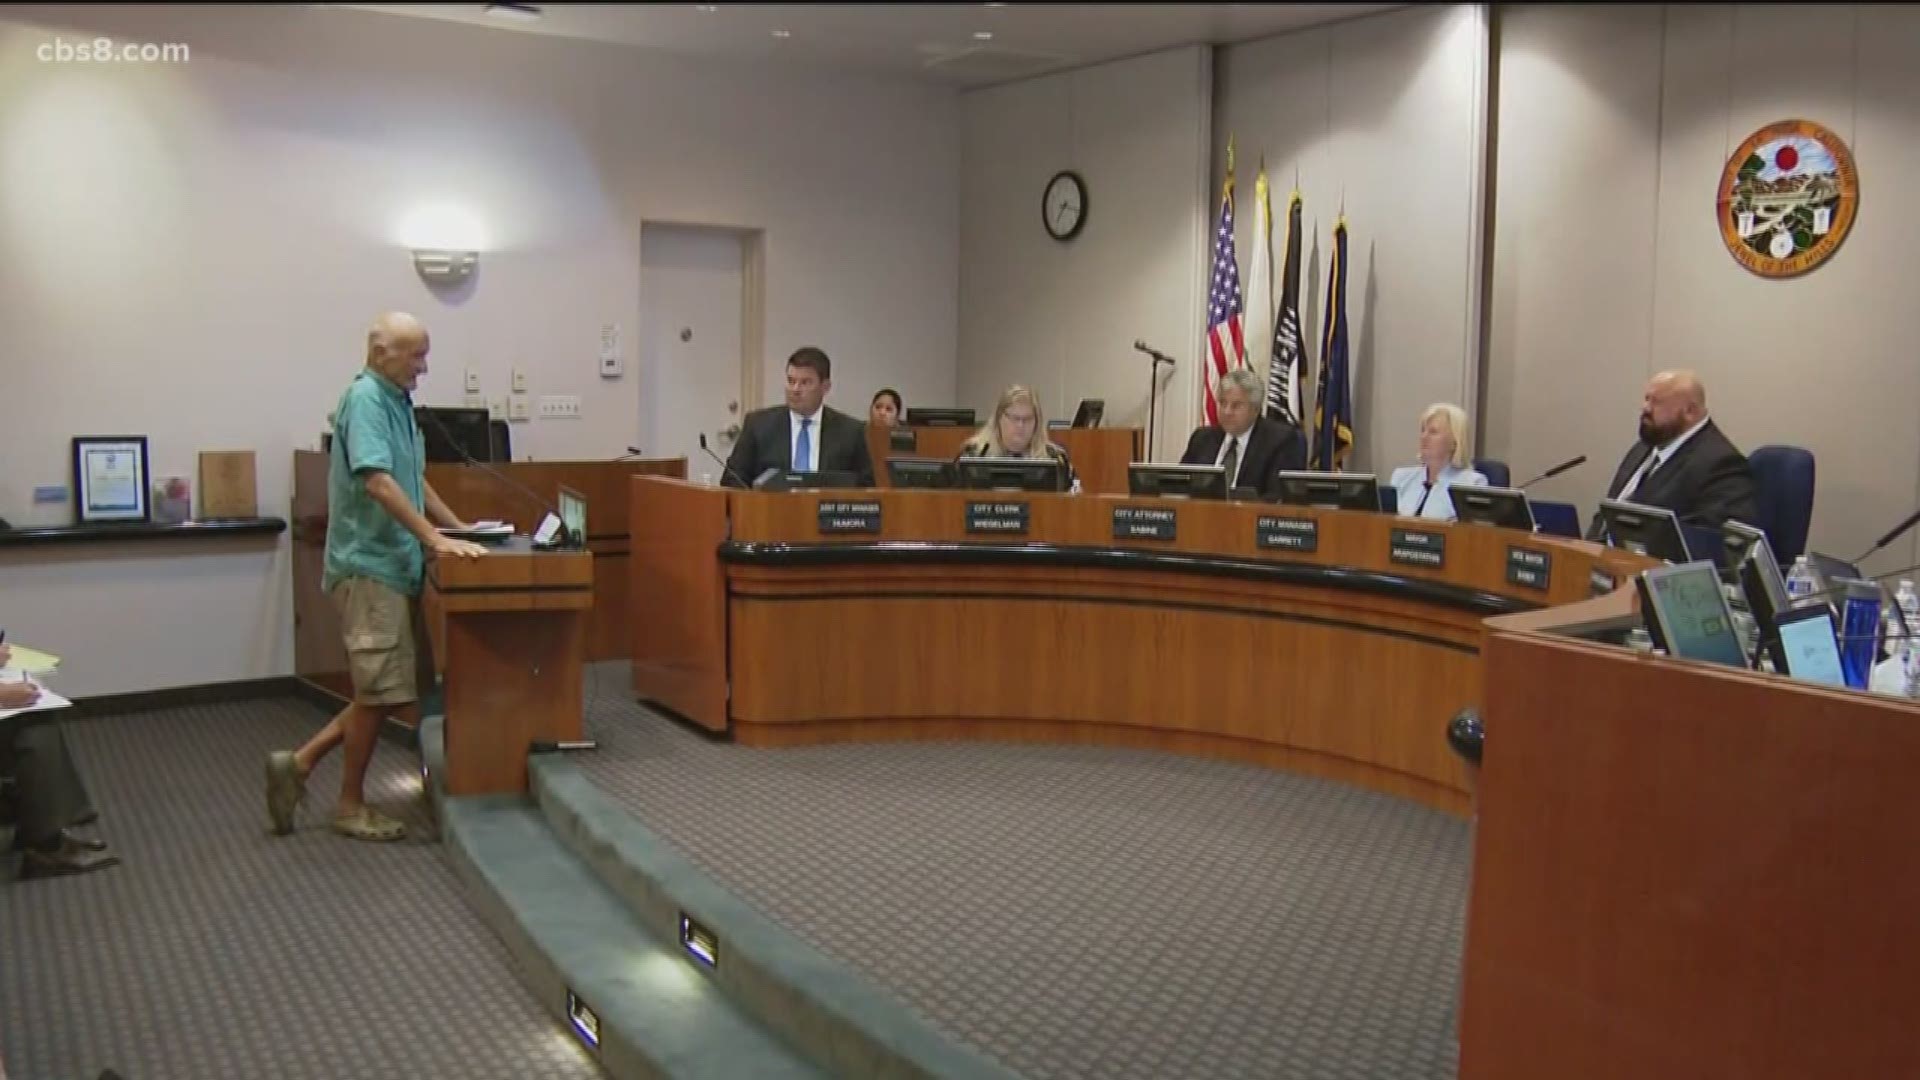 On Tuesday, the La Mesa City Council voted 4-1 to regulate 5G technology towers.